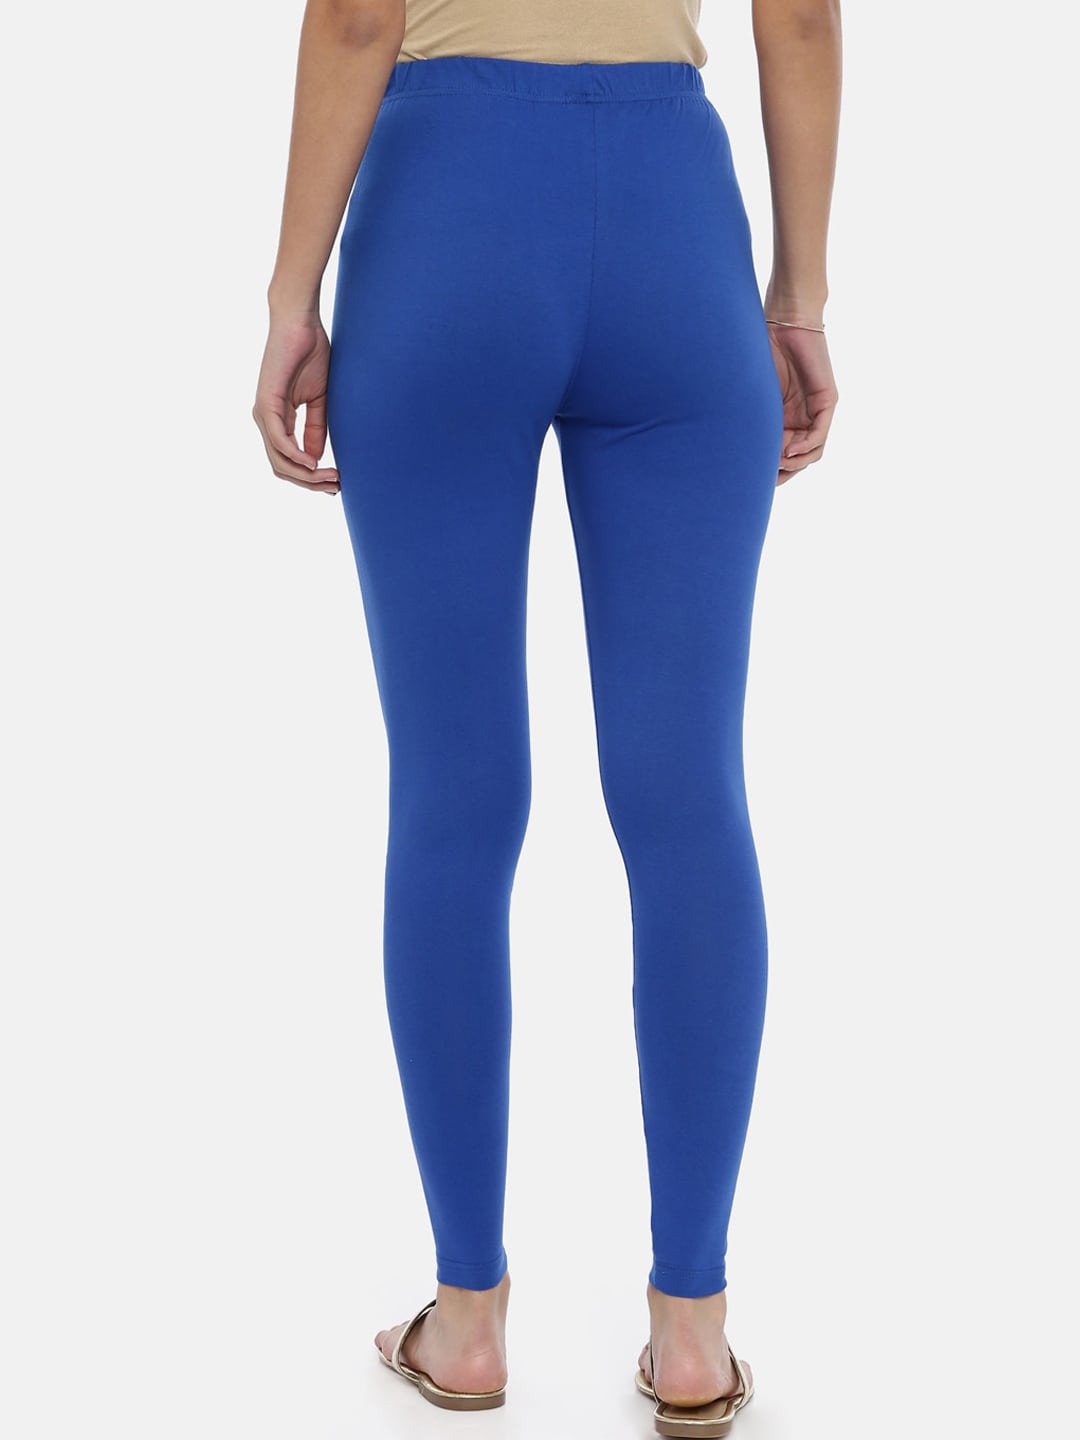 Souchii Navy Blue Solid Slim-Fit Ankle-Length Leggings